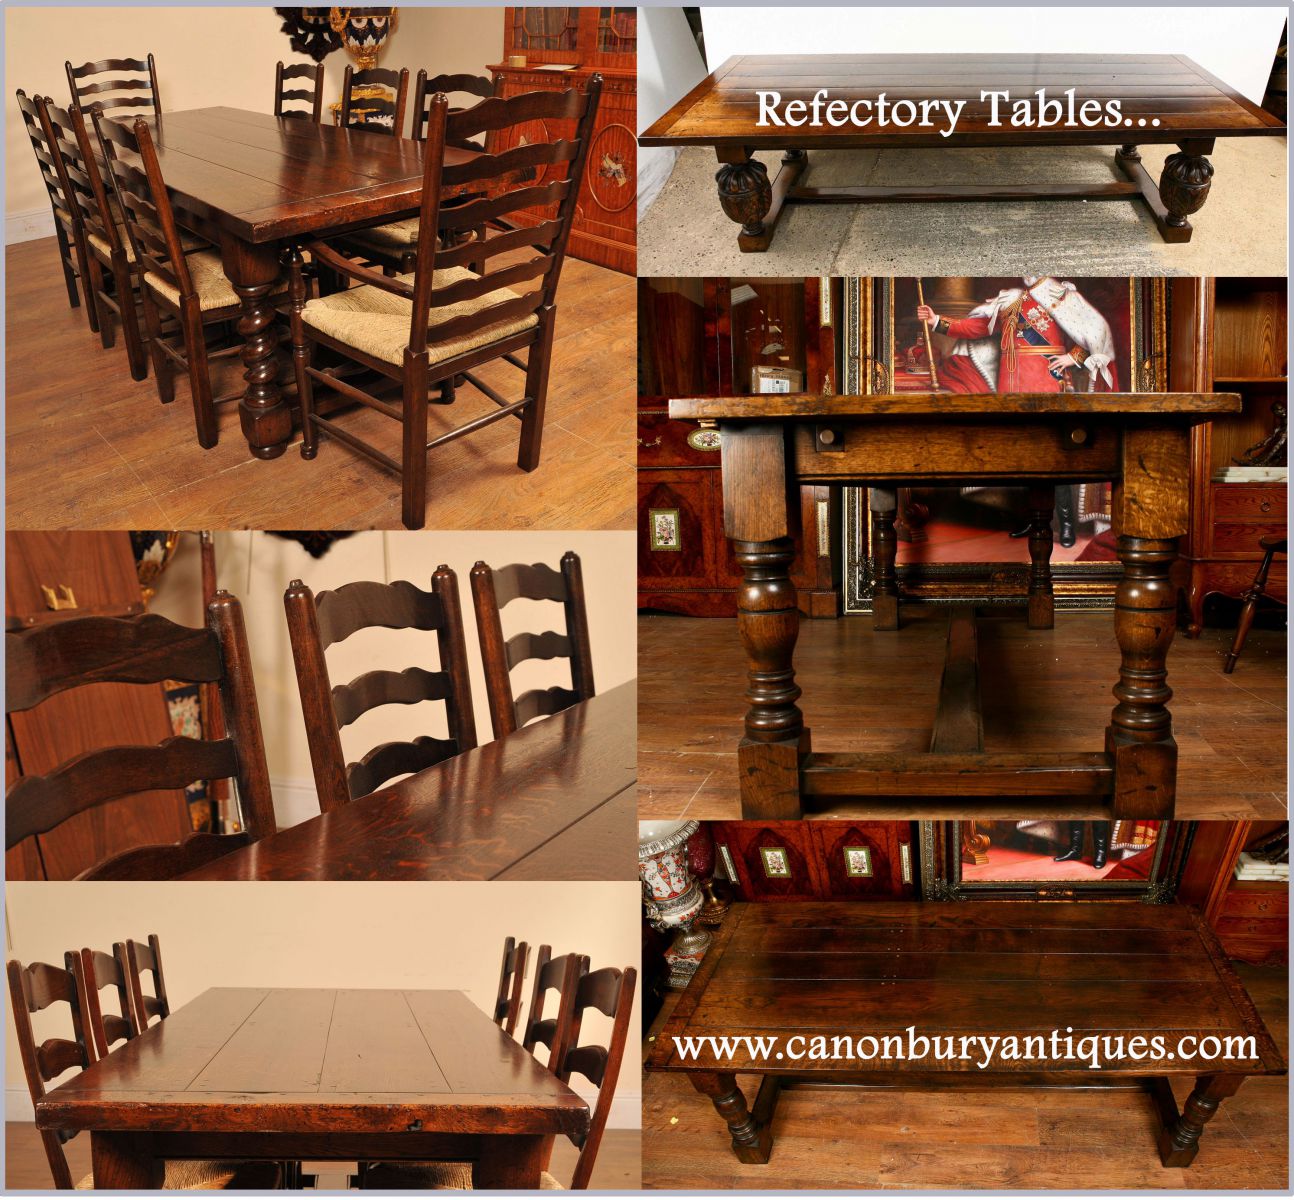 Refectory Tables